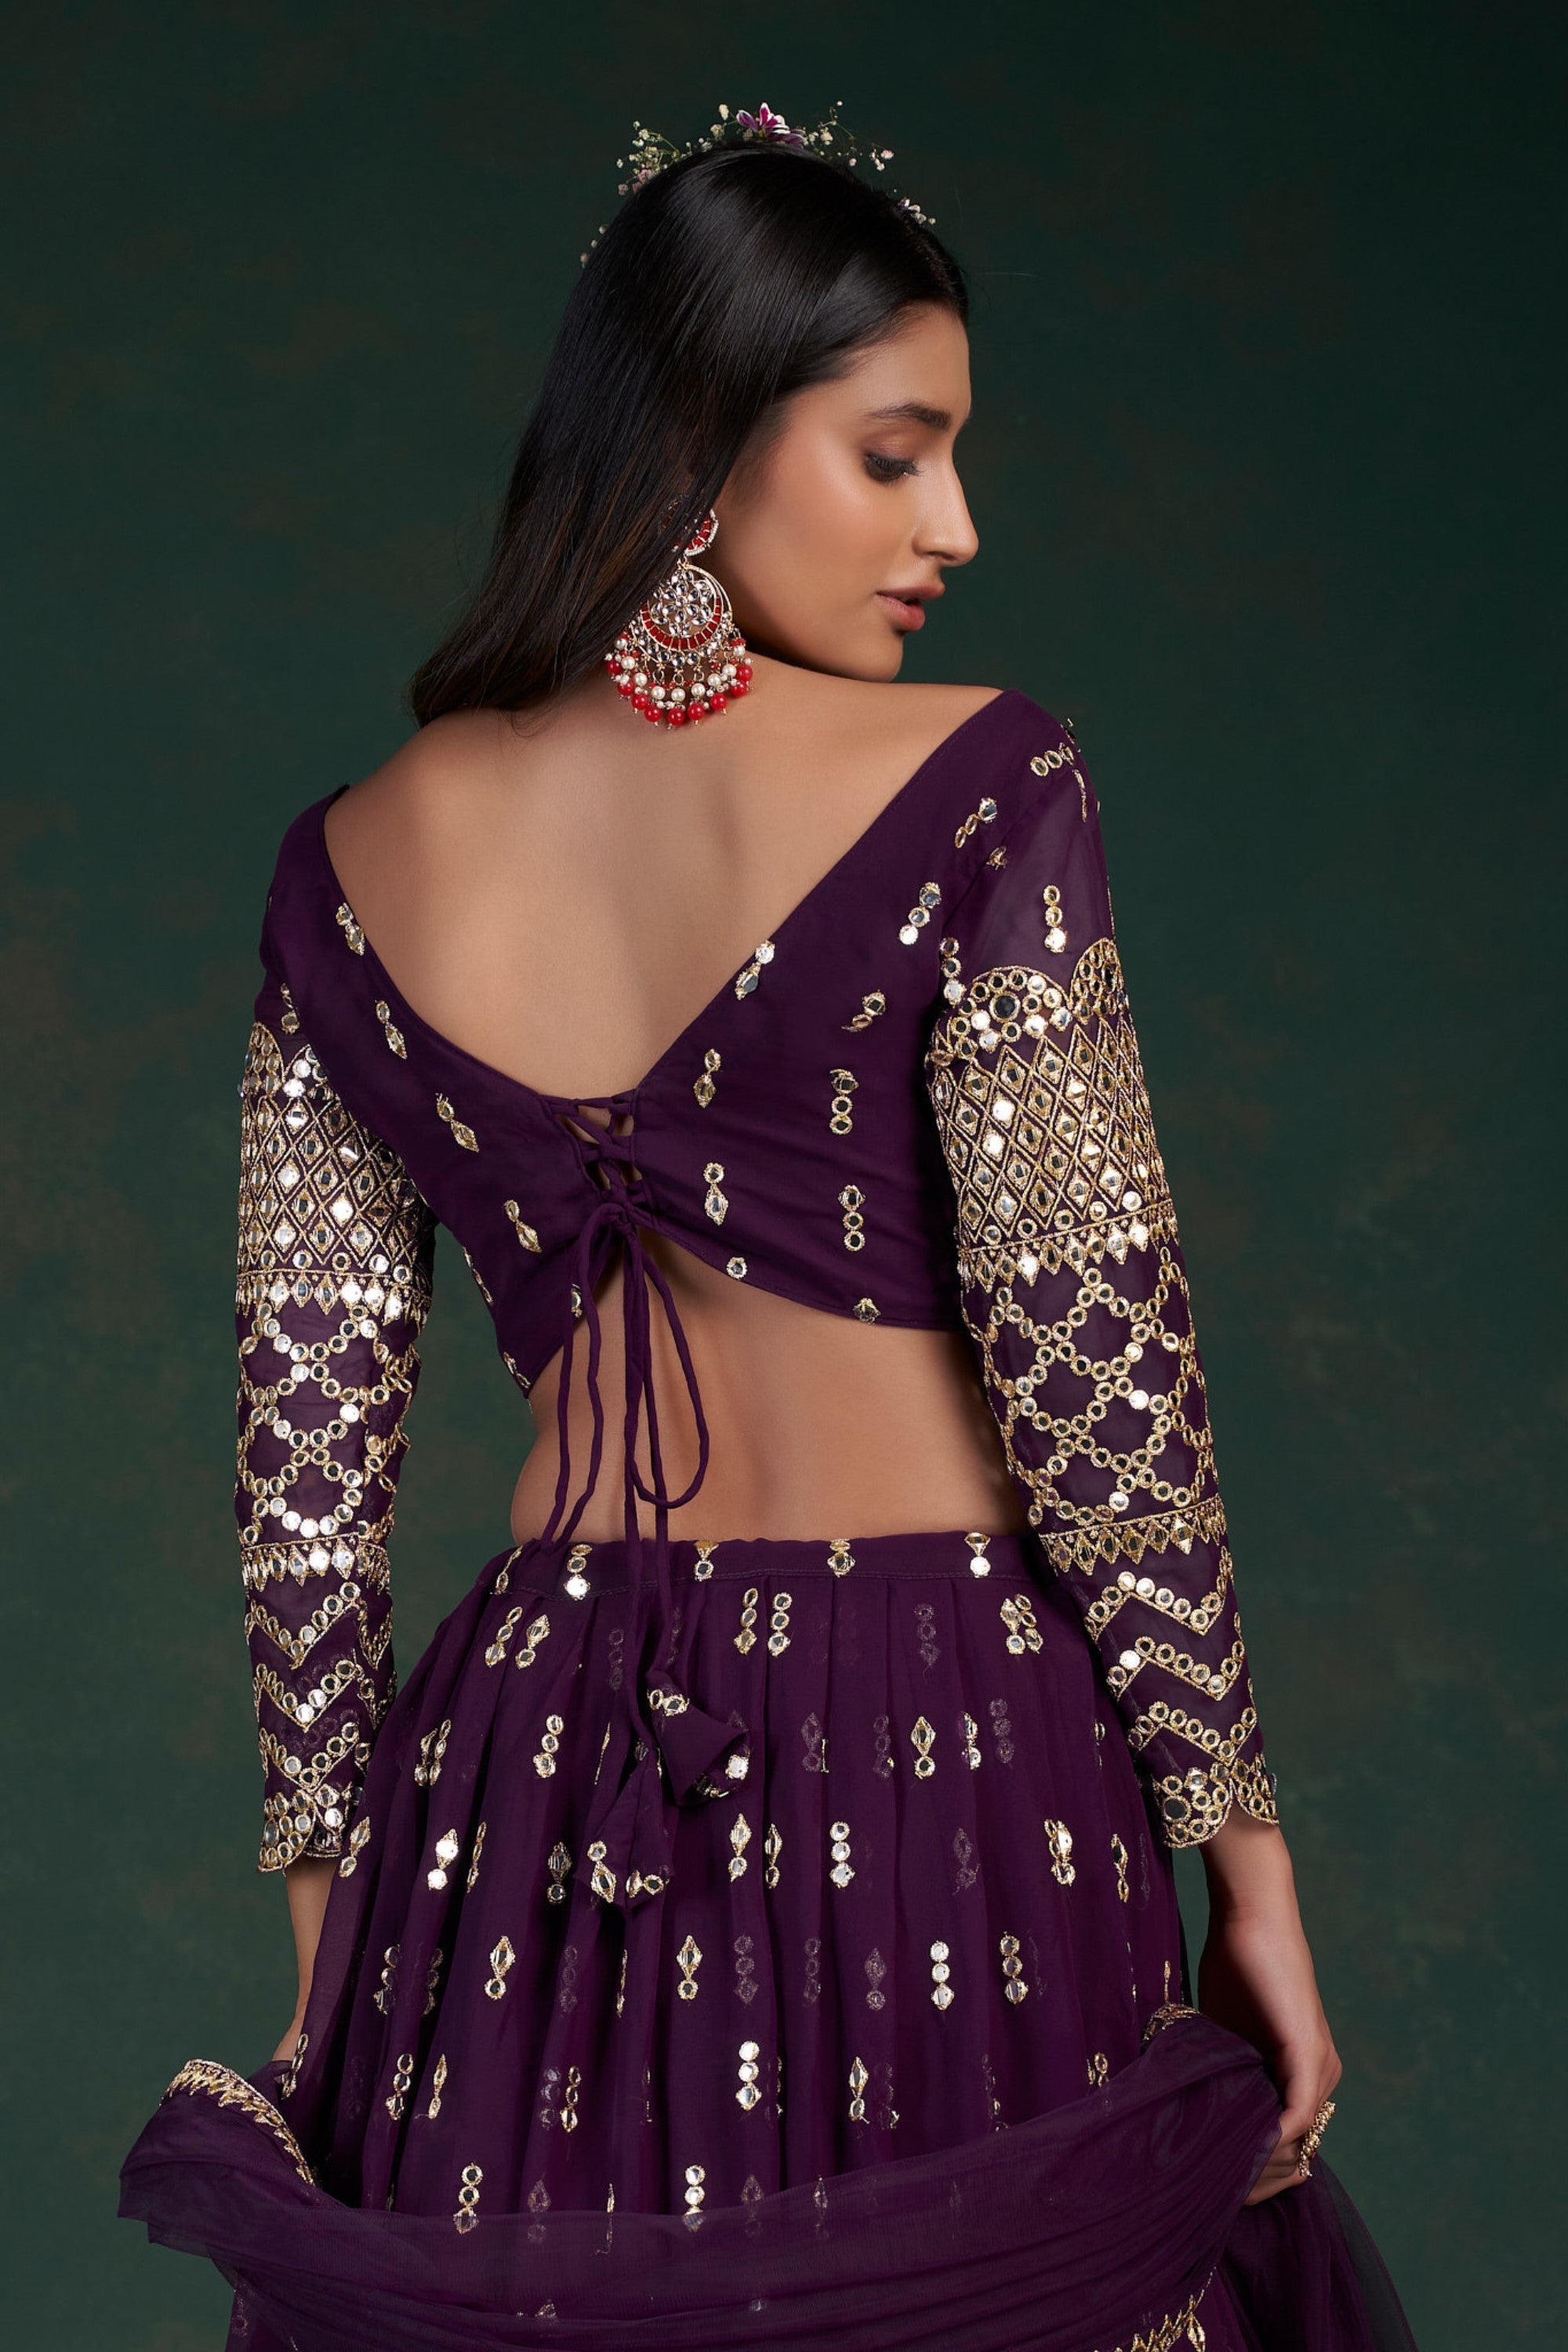 60+ Lehenga Blouse Designs To Browse & Take Inspiration From! | WedMeGood